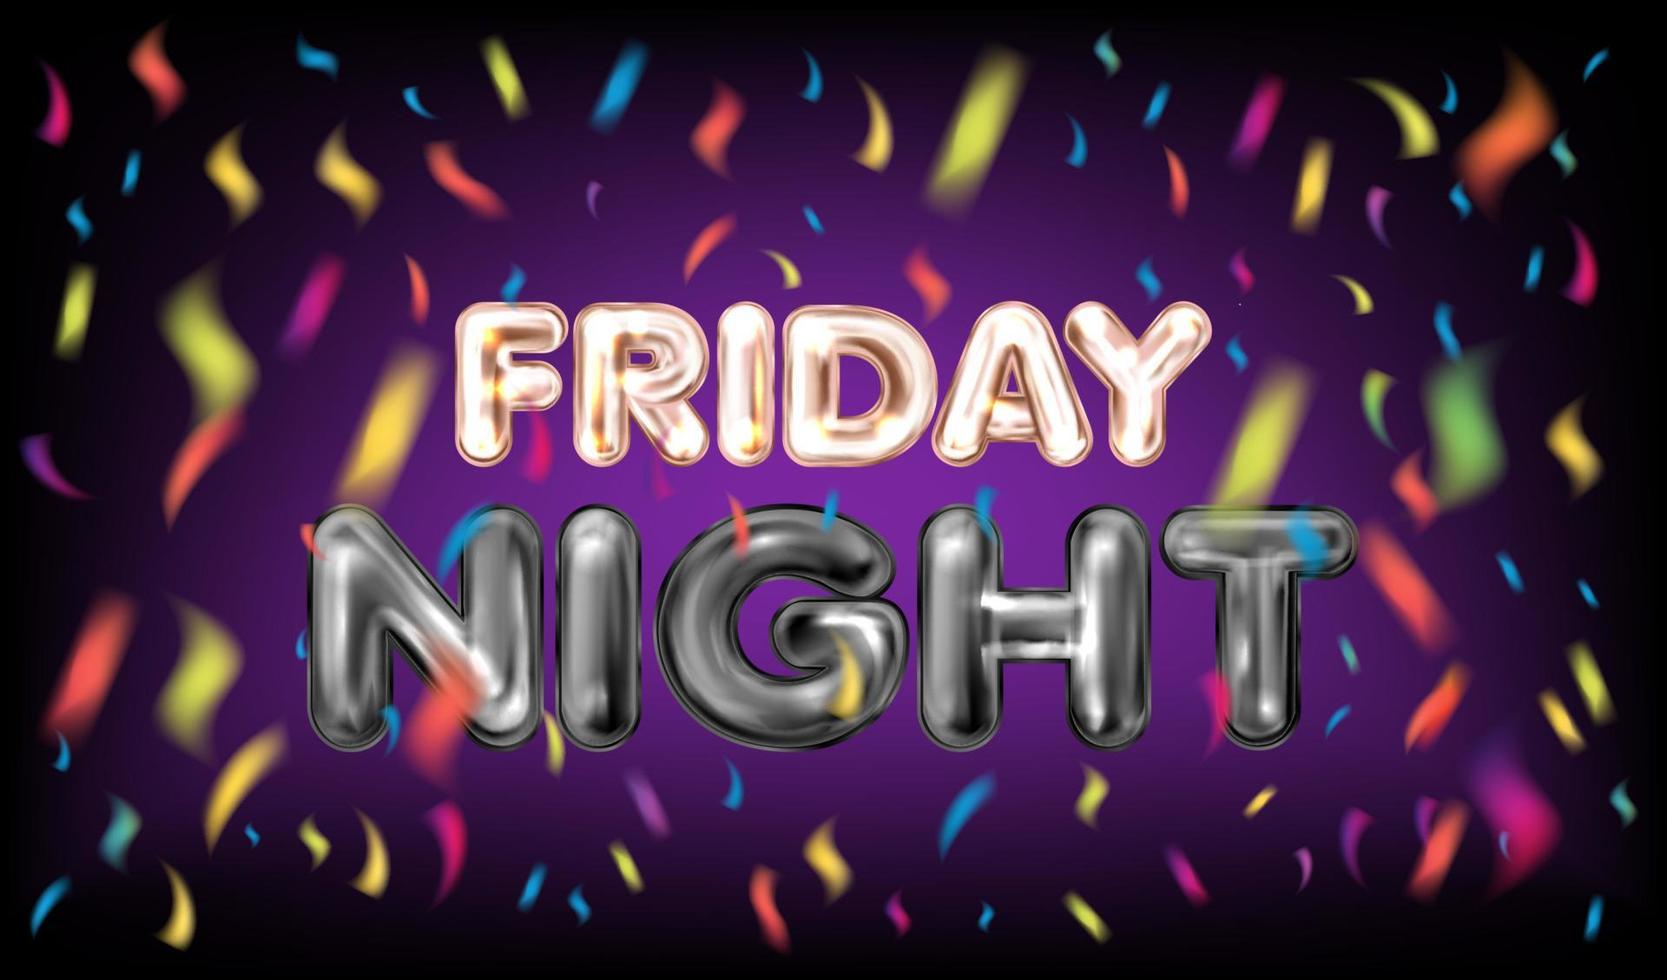 Friday night violet banner with confetti vector